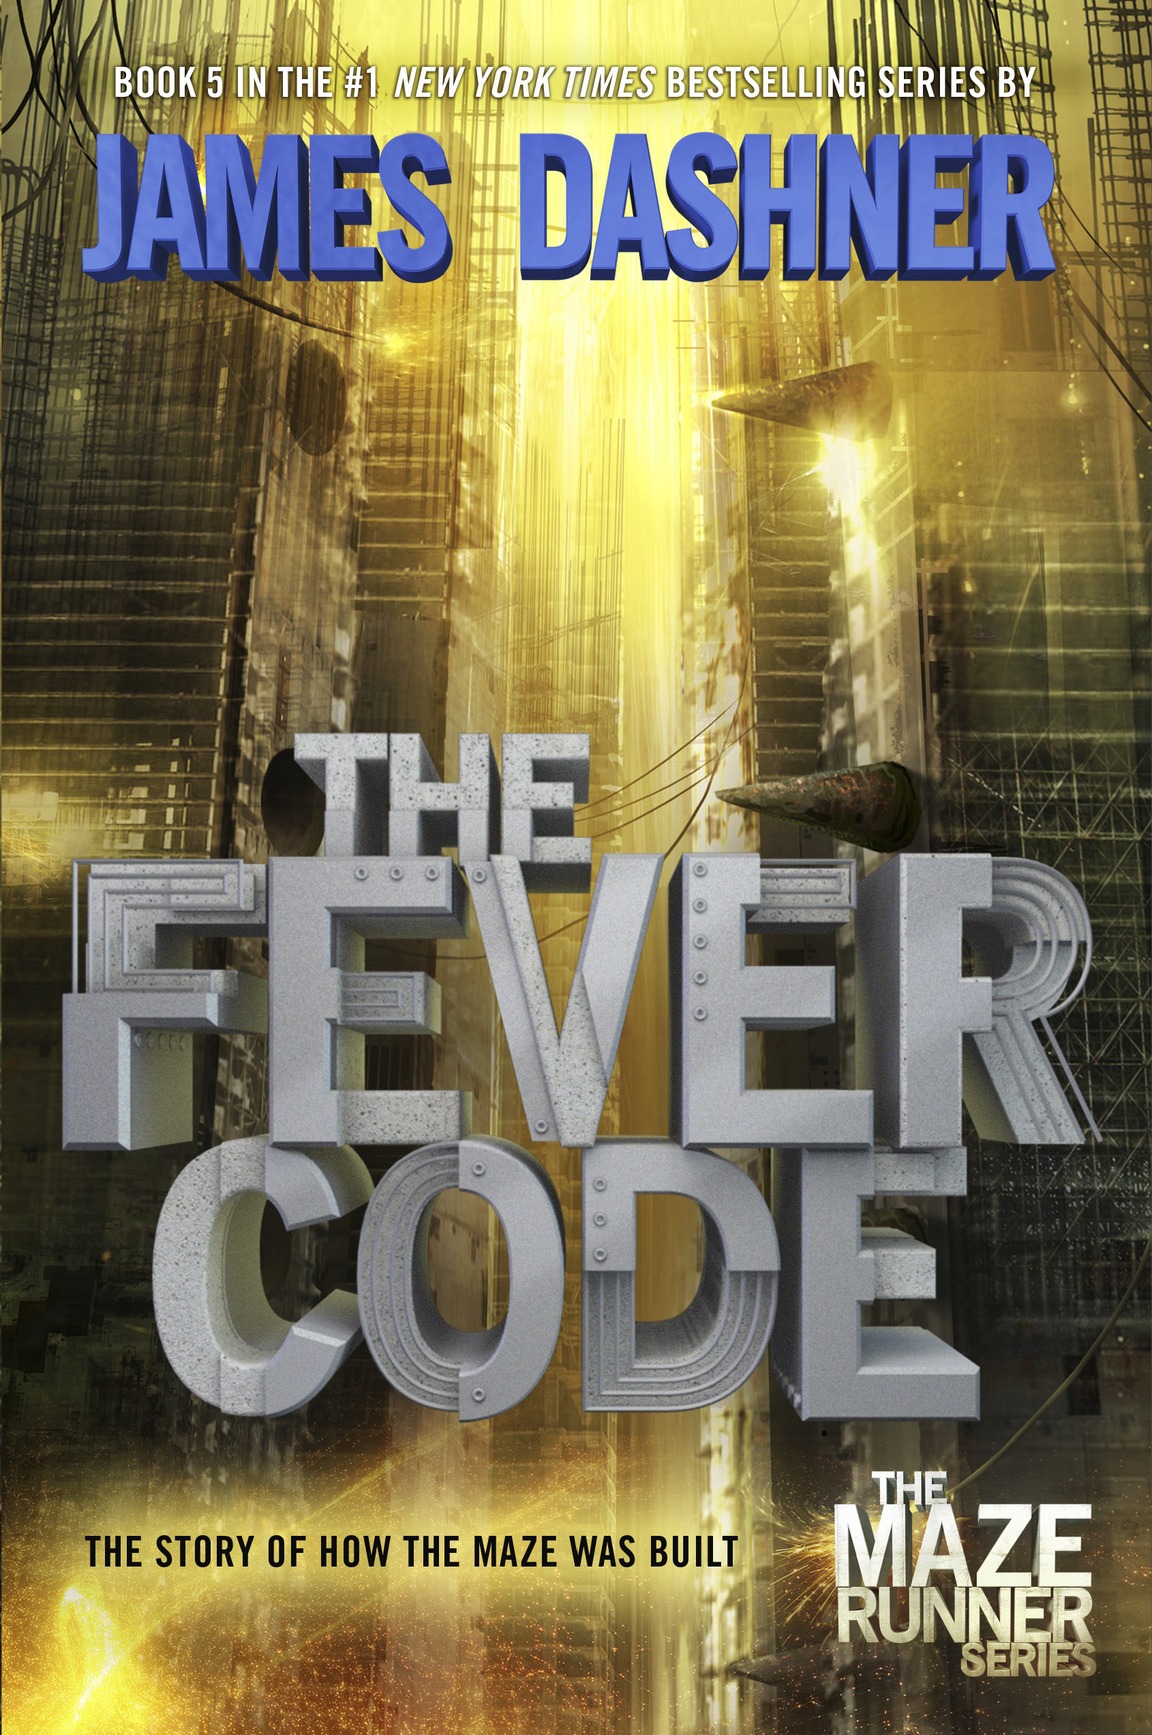 The Fever Code (2016)